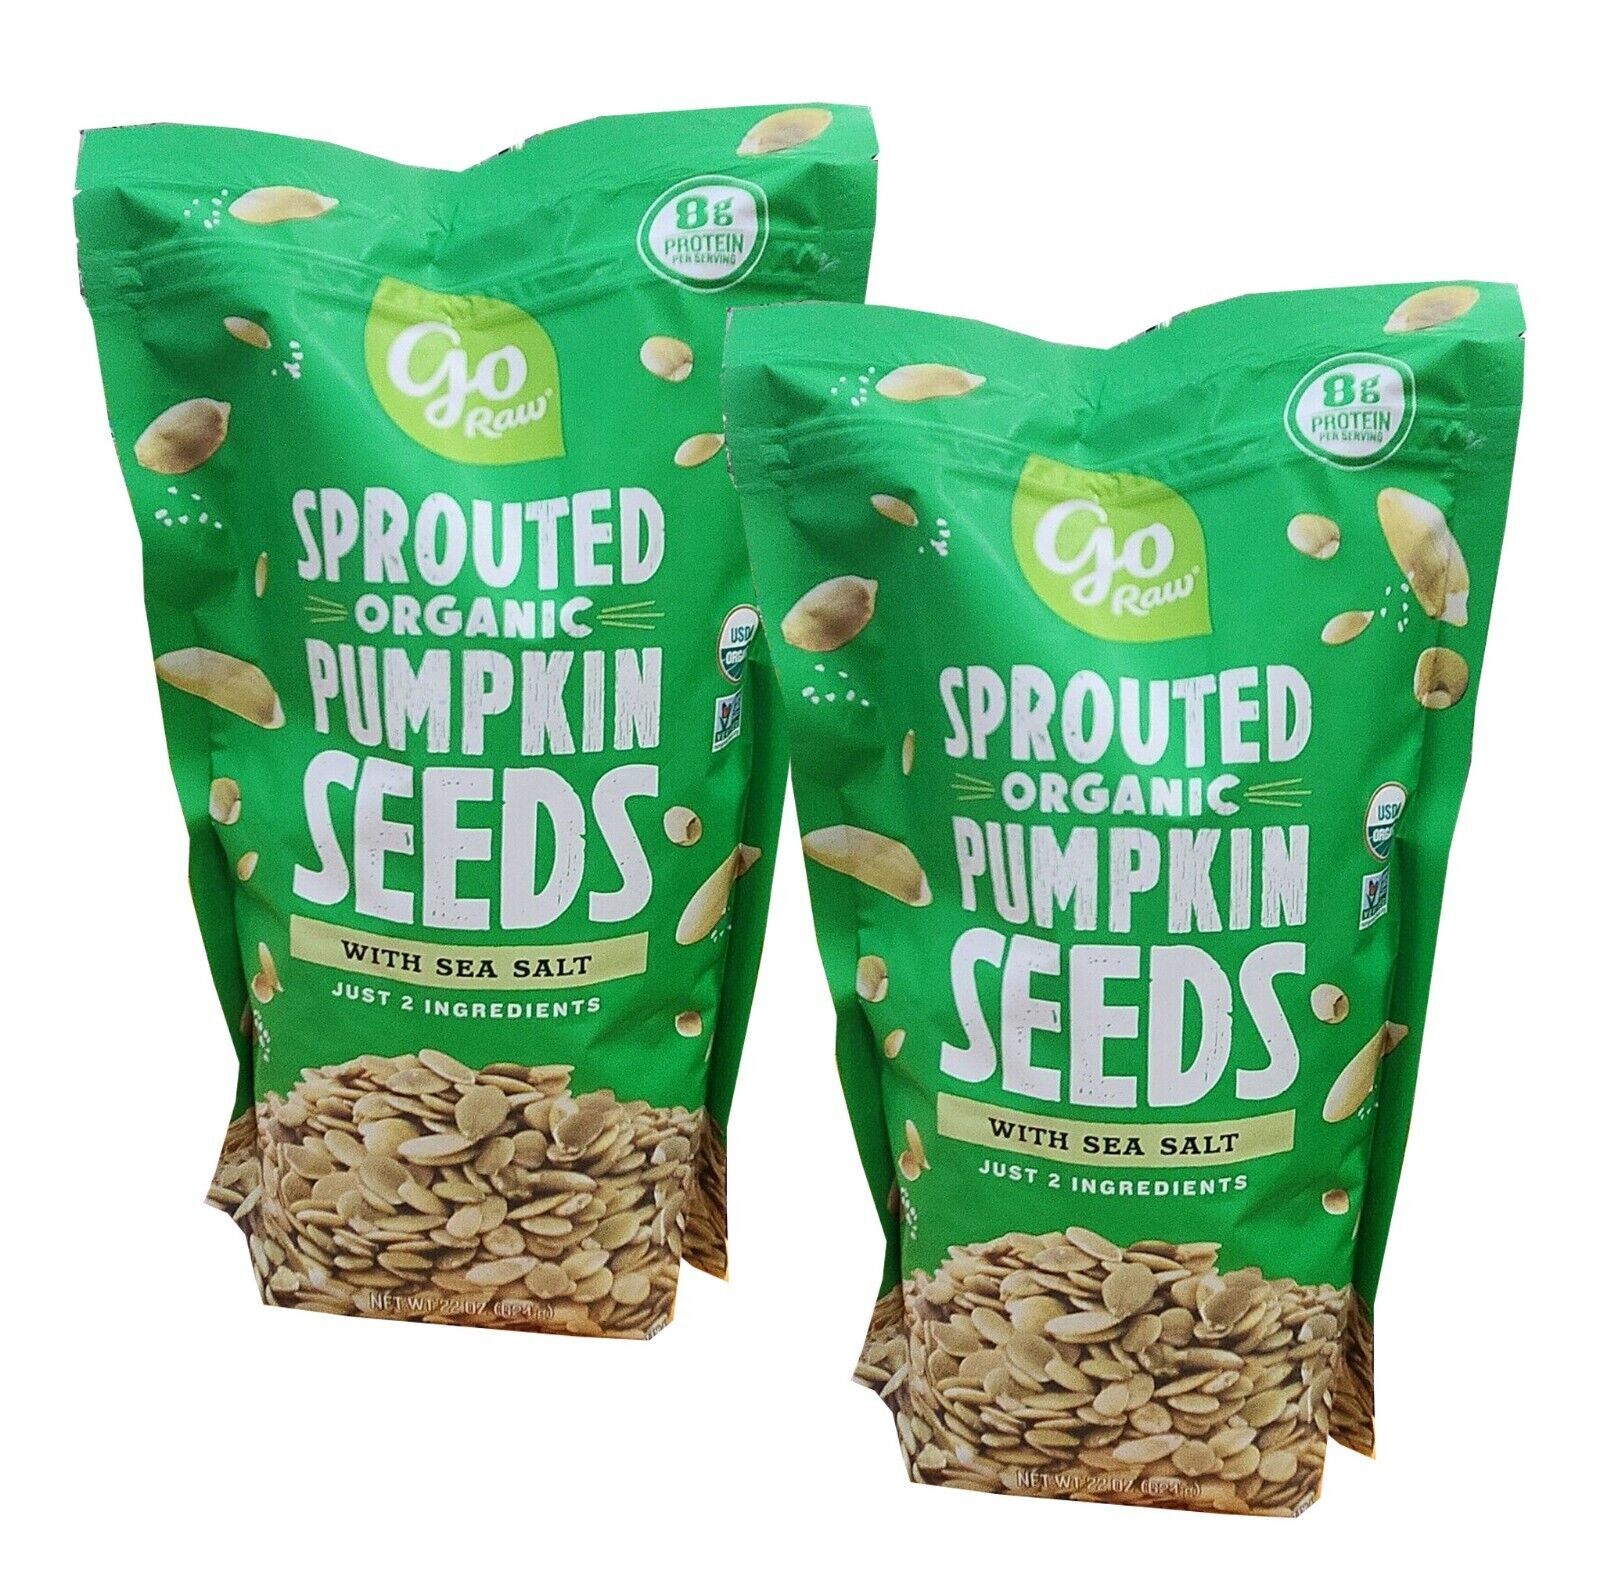 2-Pack Go Raw Sprouted Organic Pumpkin Seeds and 50 similar items